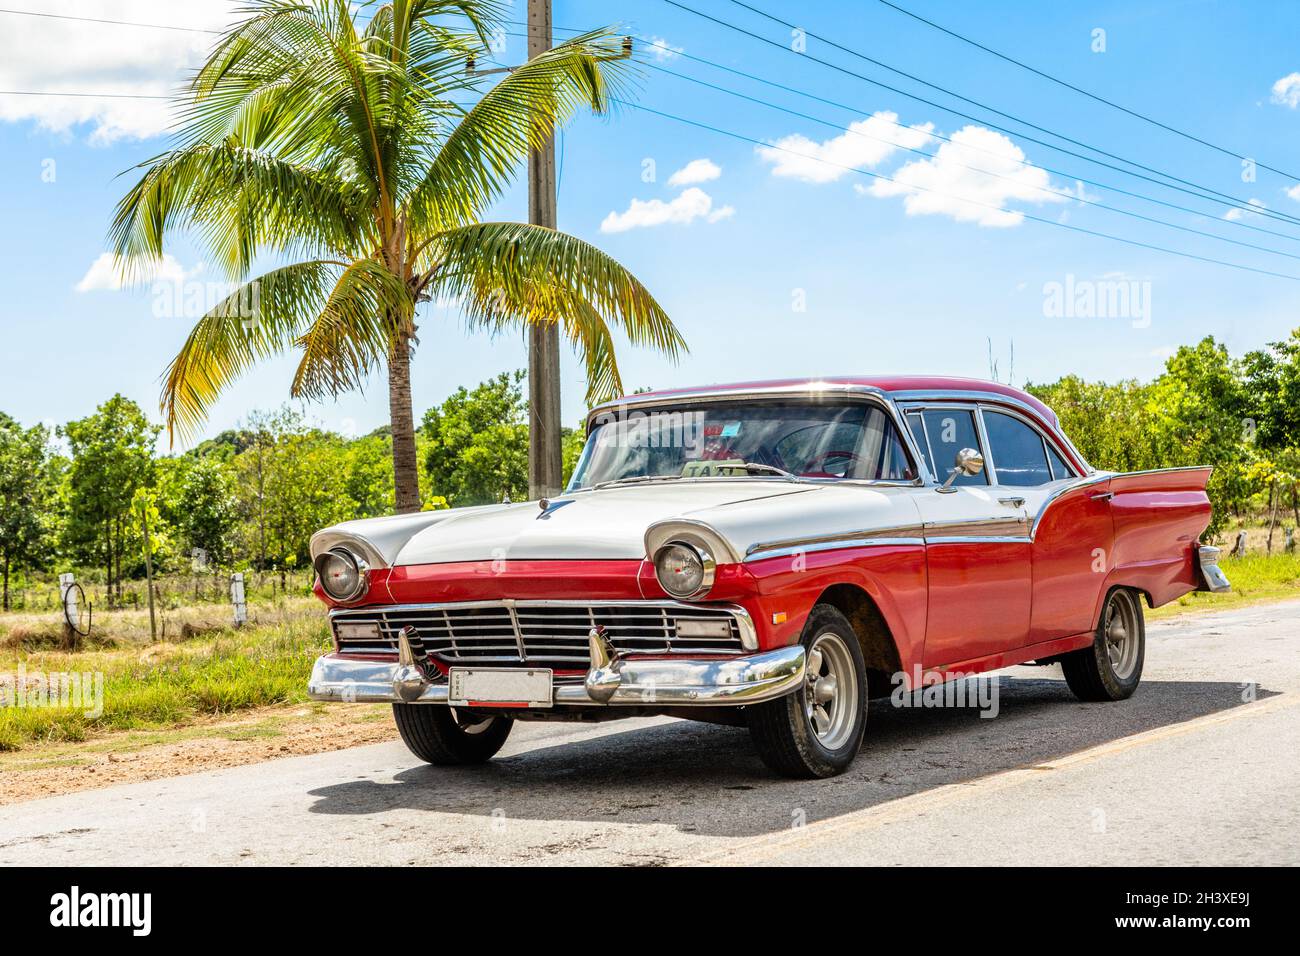 Old white-red classic american retro car on the road in countryside, Trinidad, Cuba Stock Photo